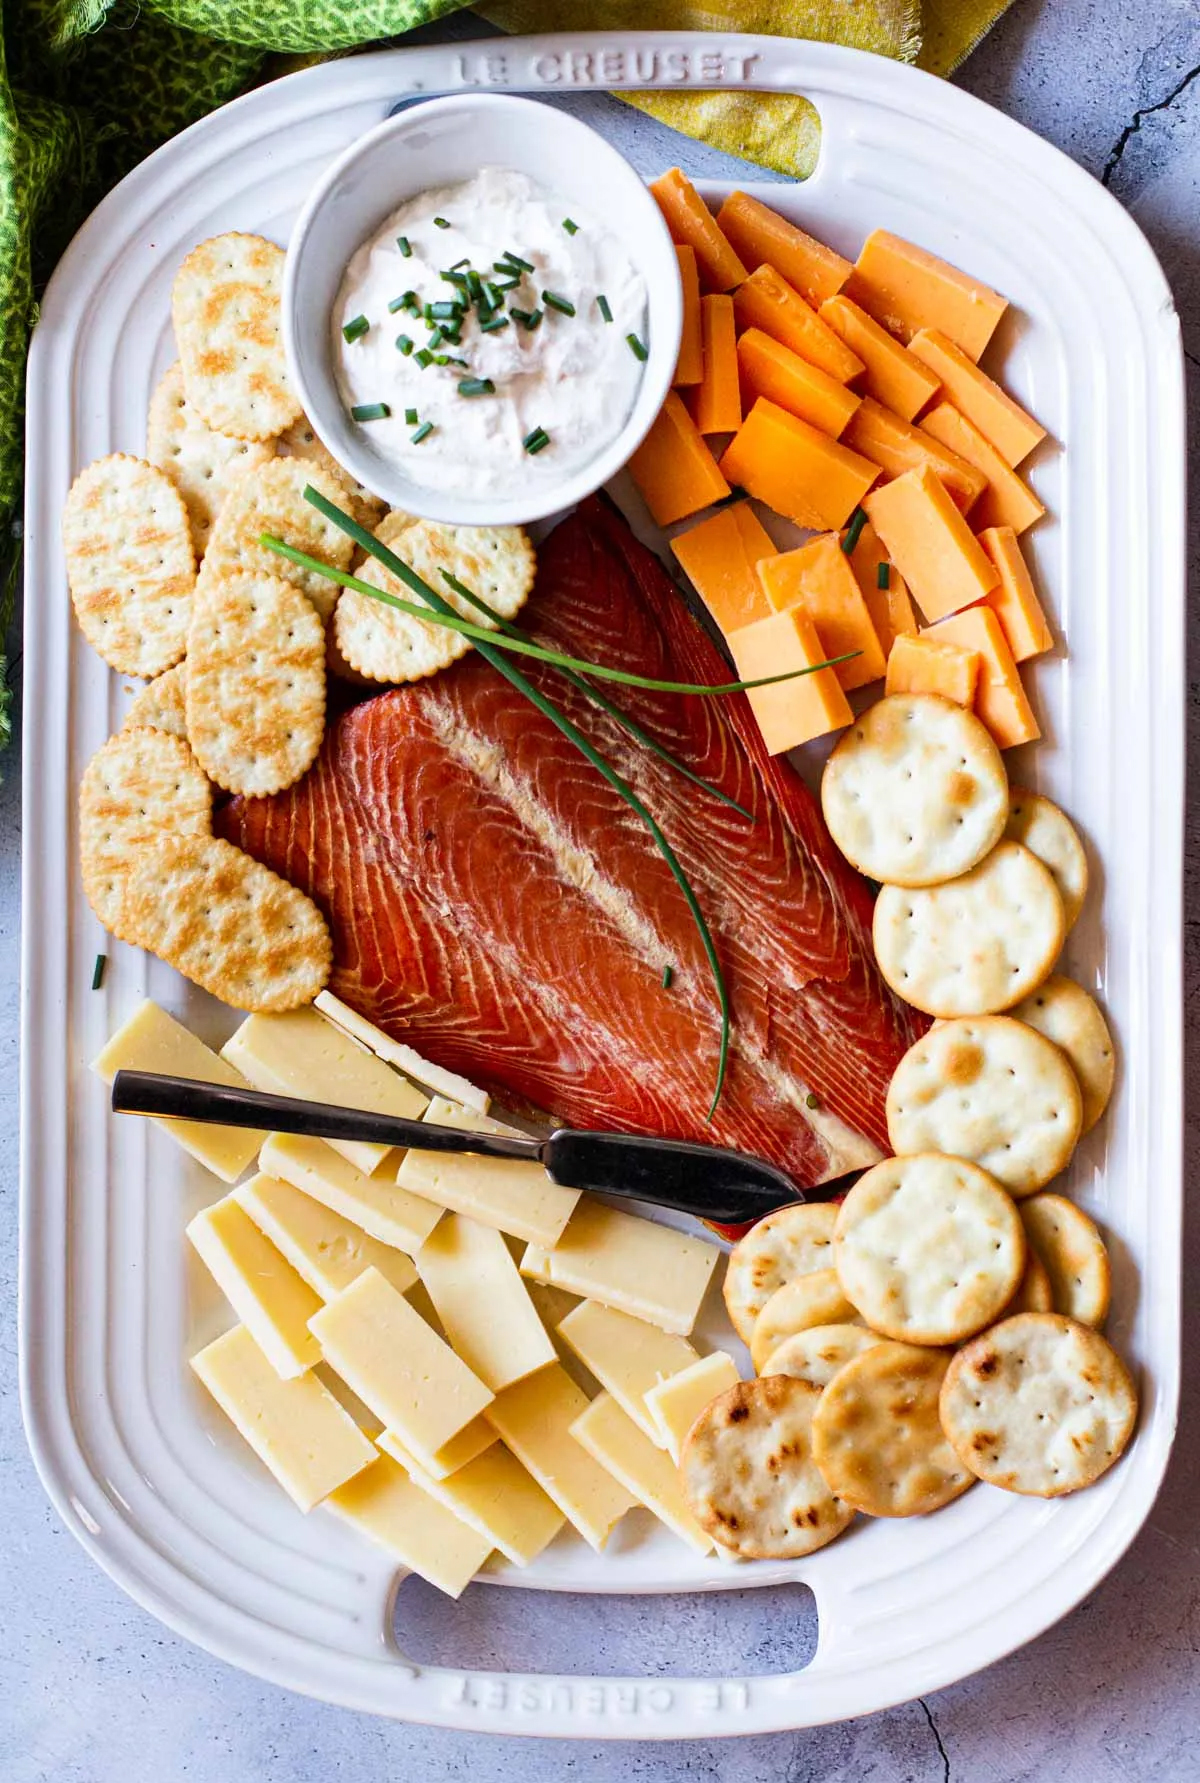 Cheese, smoked salmon, and crackers are included on Highlands Ranch Foodie's charcuterie board.